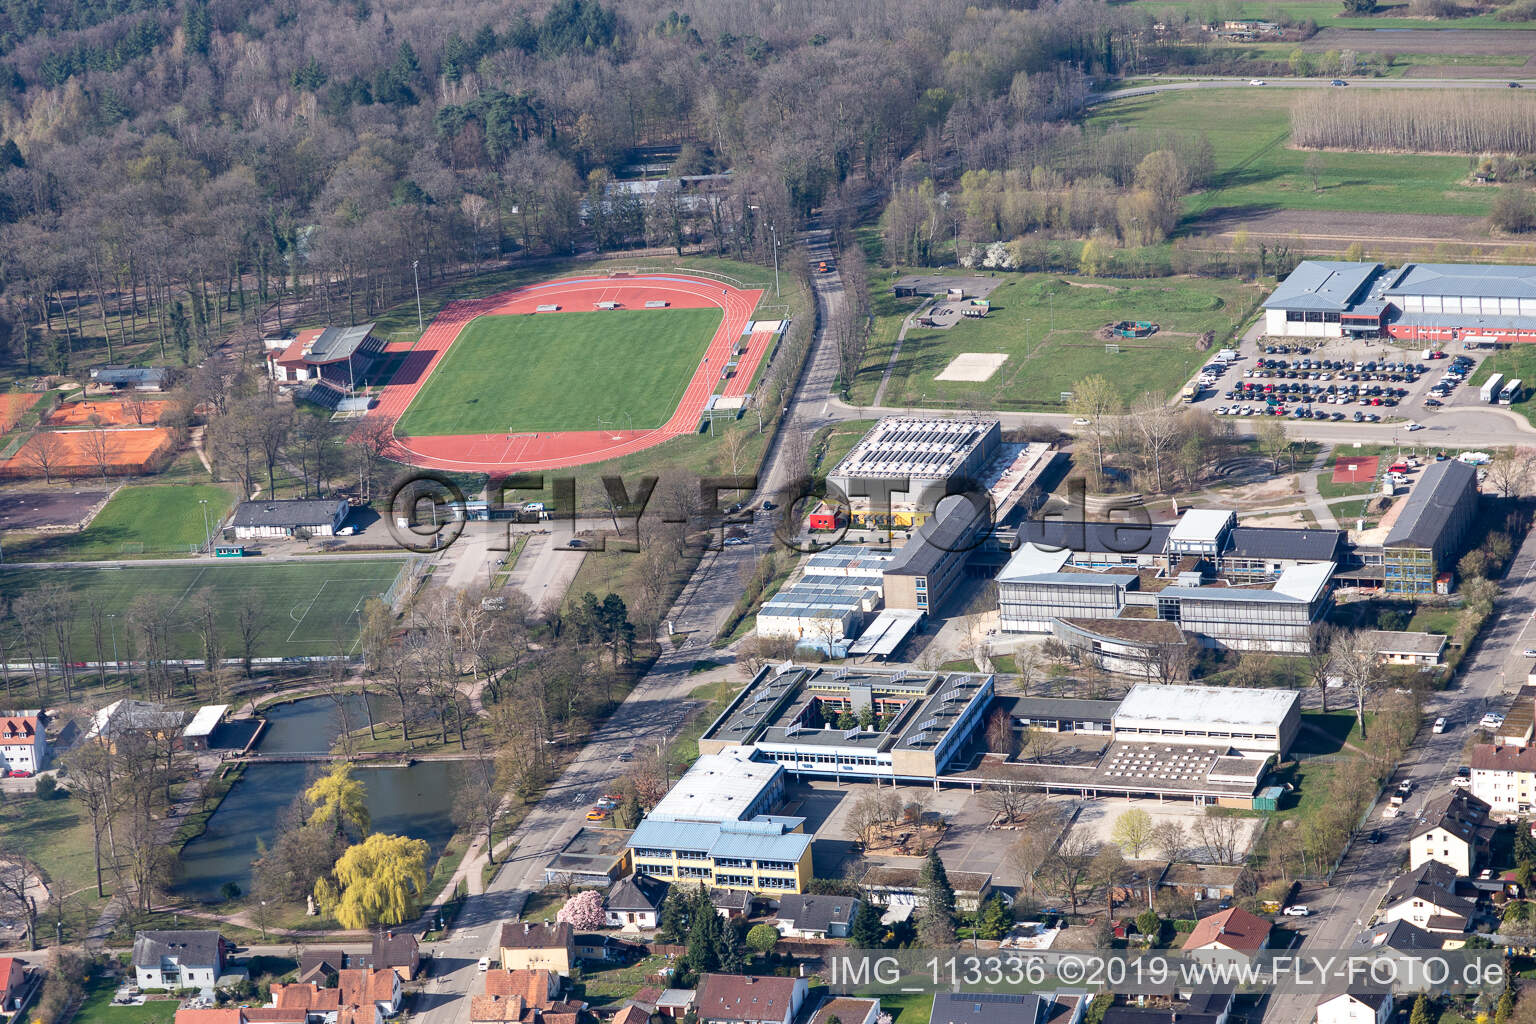 Stadion in Kandel in the state Rhineland-Palatinate, Germany